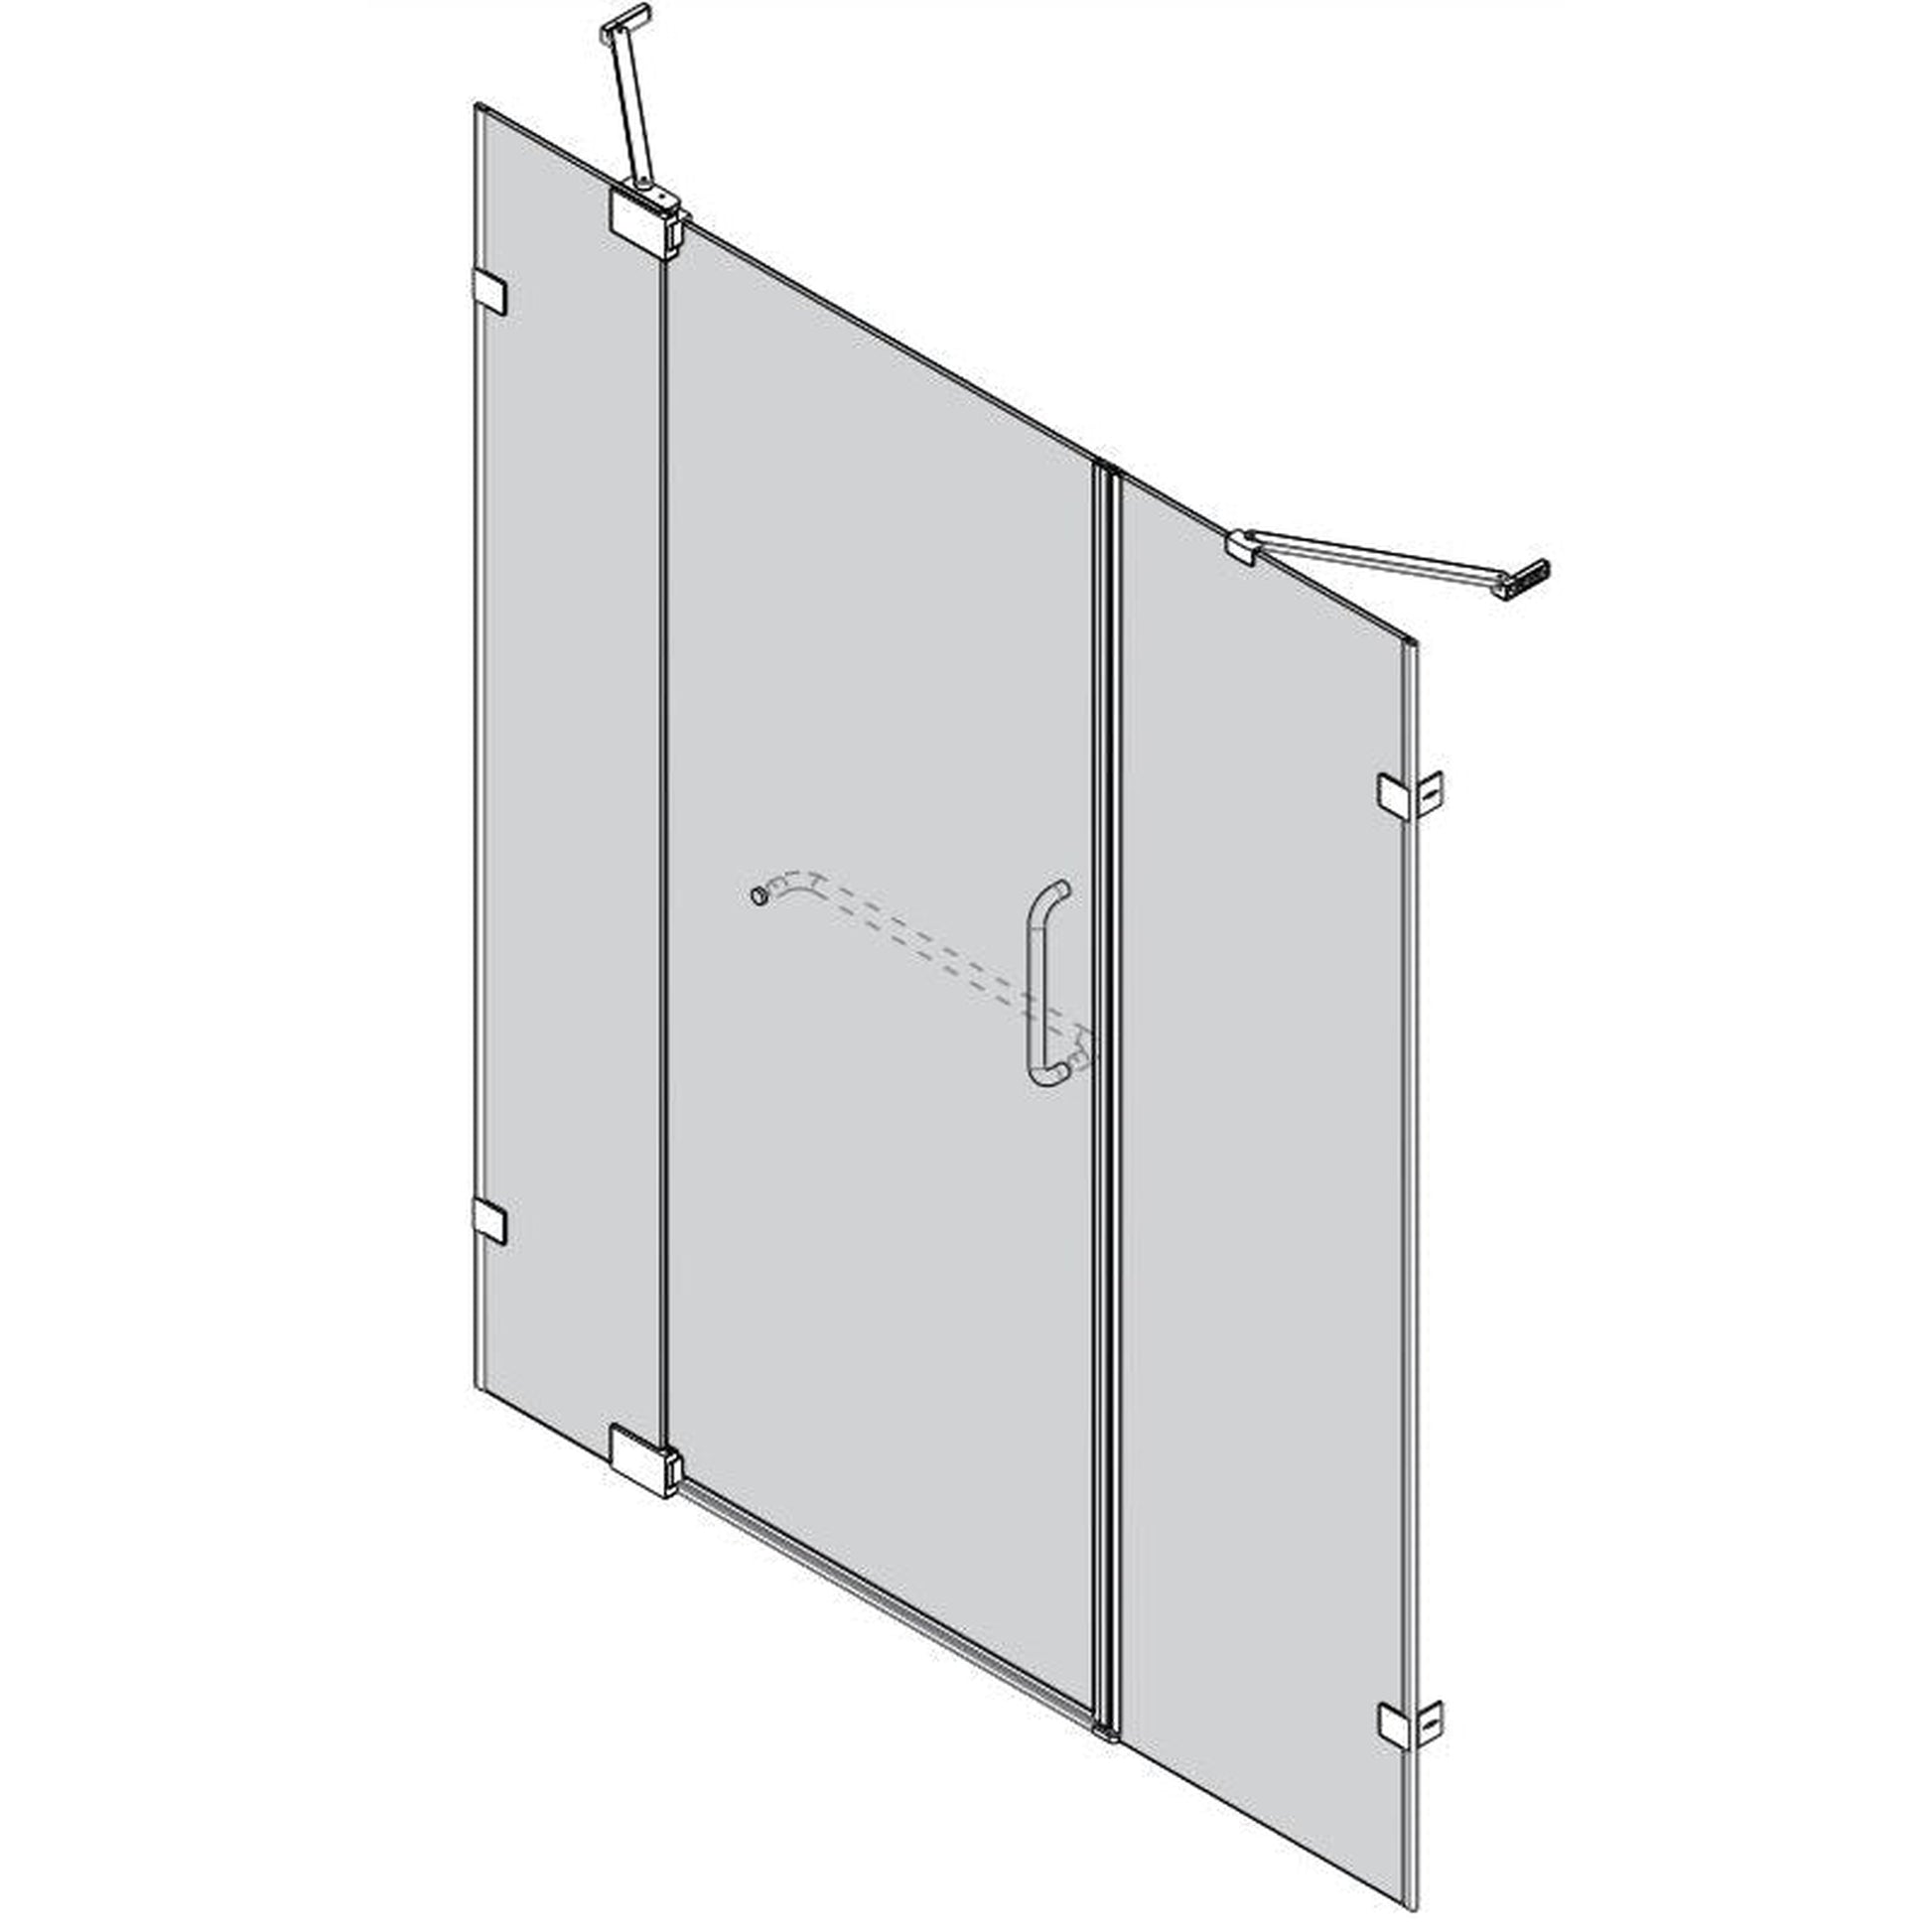 Vinnova Milano 48" x 72" Polished Chrome In-line Hinged Frameless Shower Door With Fixed Glass on Both Sides